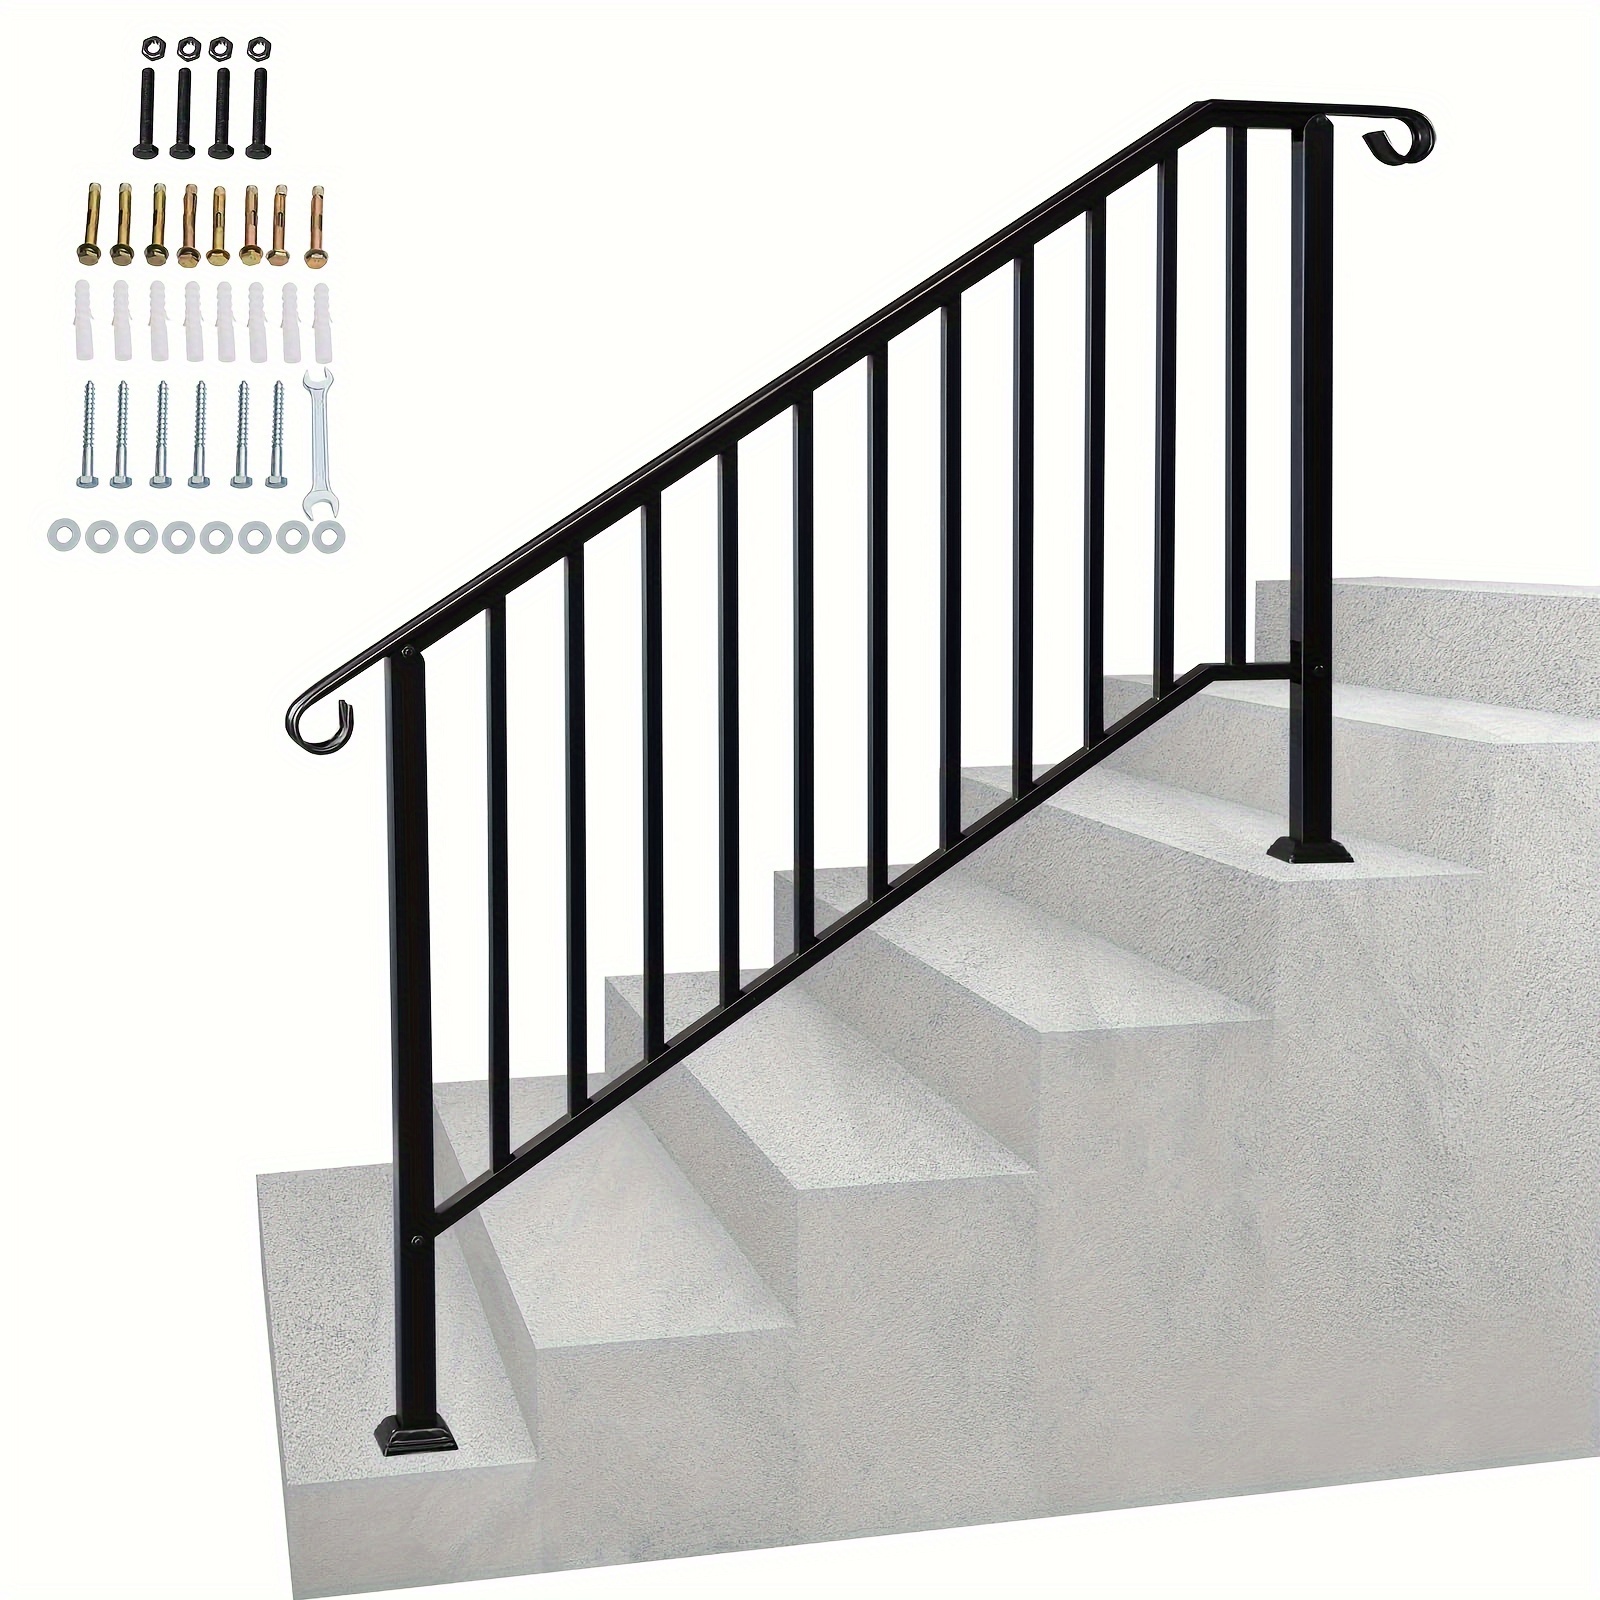 

Antsku 5 Step Handrails For Outdoor Steps, Wrought Iron Stair Railing Fits 4 Or 5 Steps, Metal Hand Rail With Installation Kit, Staircase Handrails For Concrete, Porch, Deck, Exterior Steps, Black